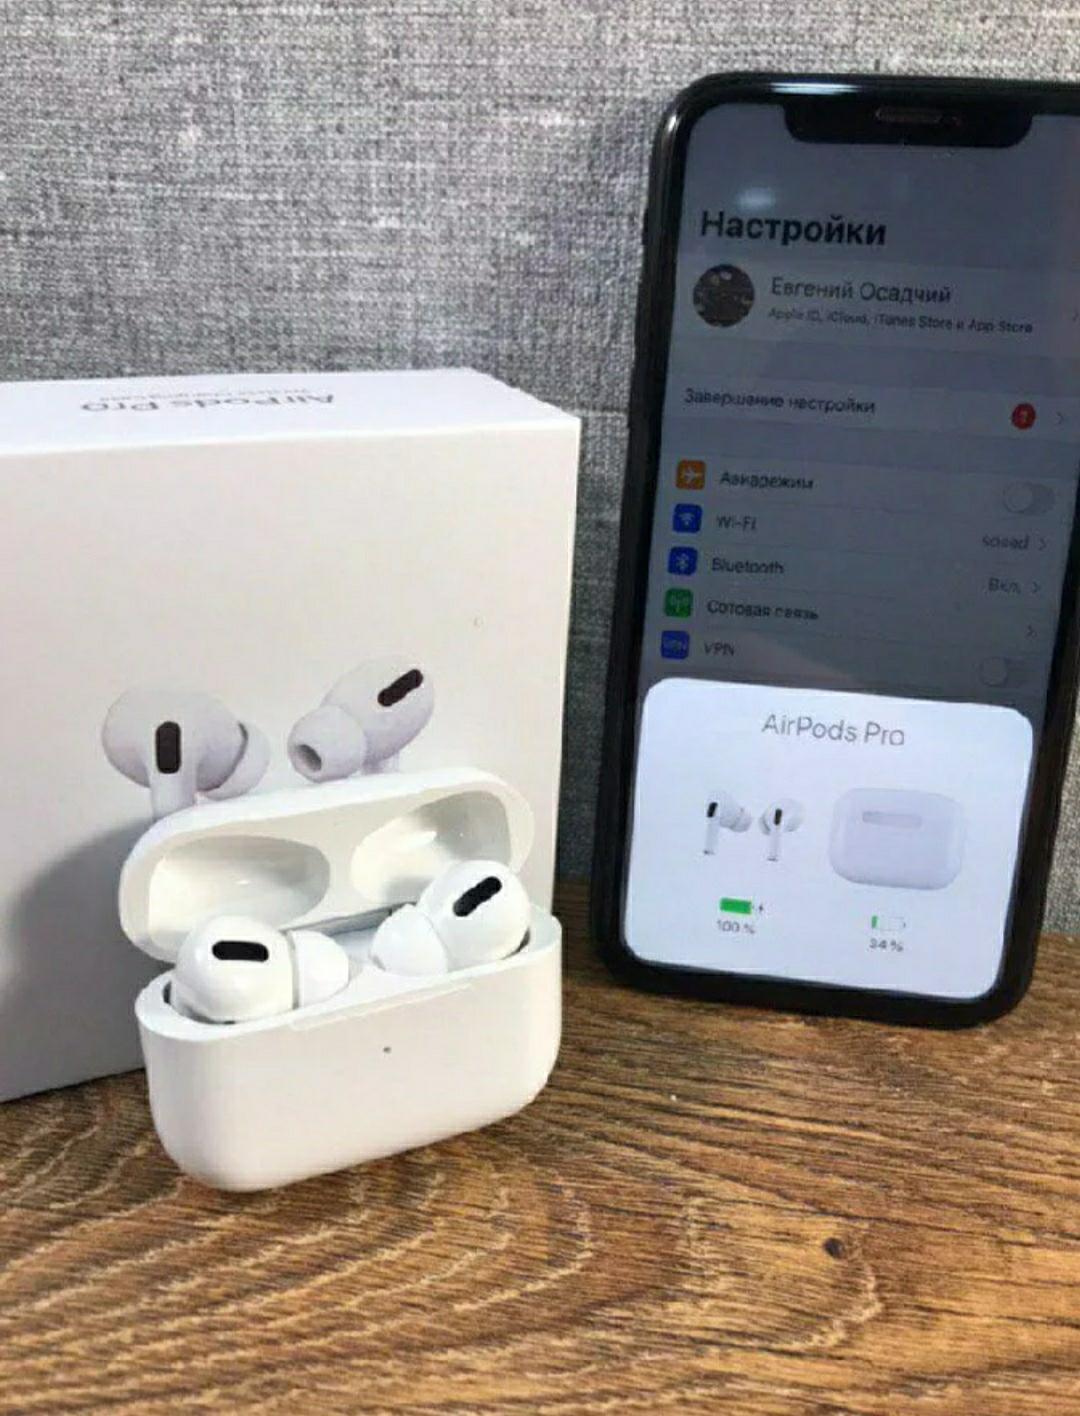 Airpods pods. Apple AIRPODS Pro 2. Наушники TWS Apple AIRPODS Pro. Наушники TWS Apple AIRPODS Pro белый. Наушники беспроводные Apple AIRPODS 1.